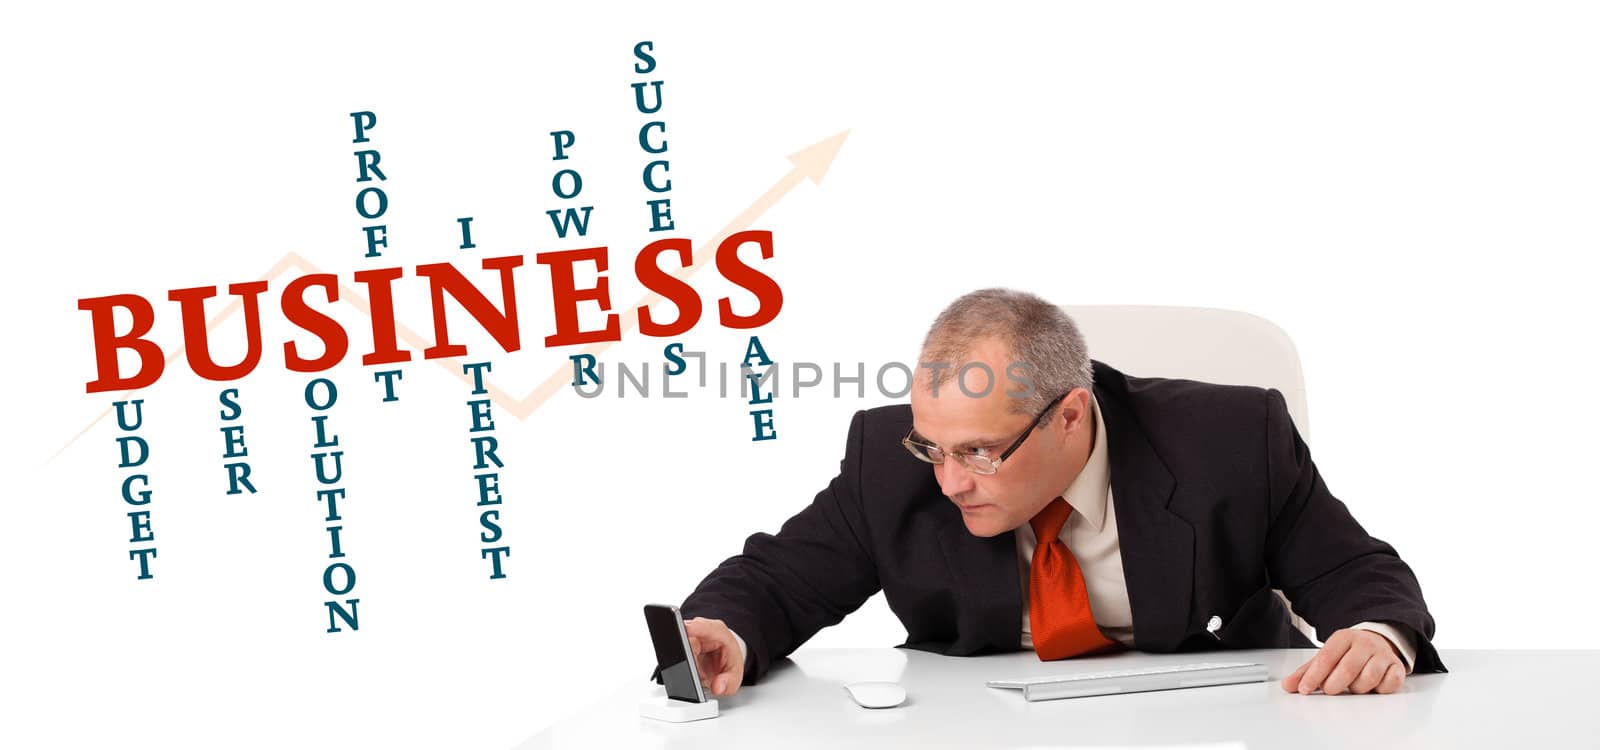 businesman sitting at desk with business word cloud by ra2studio